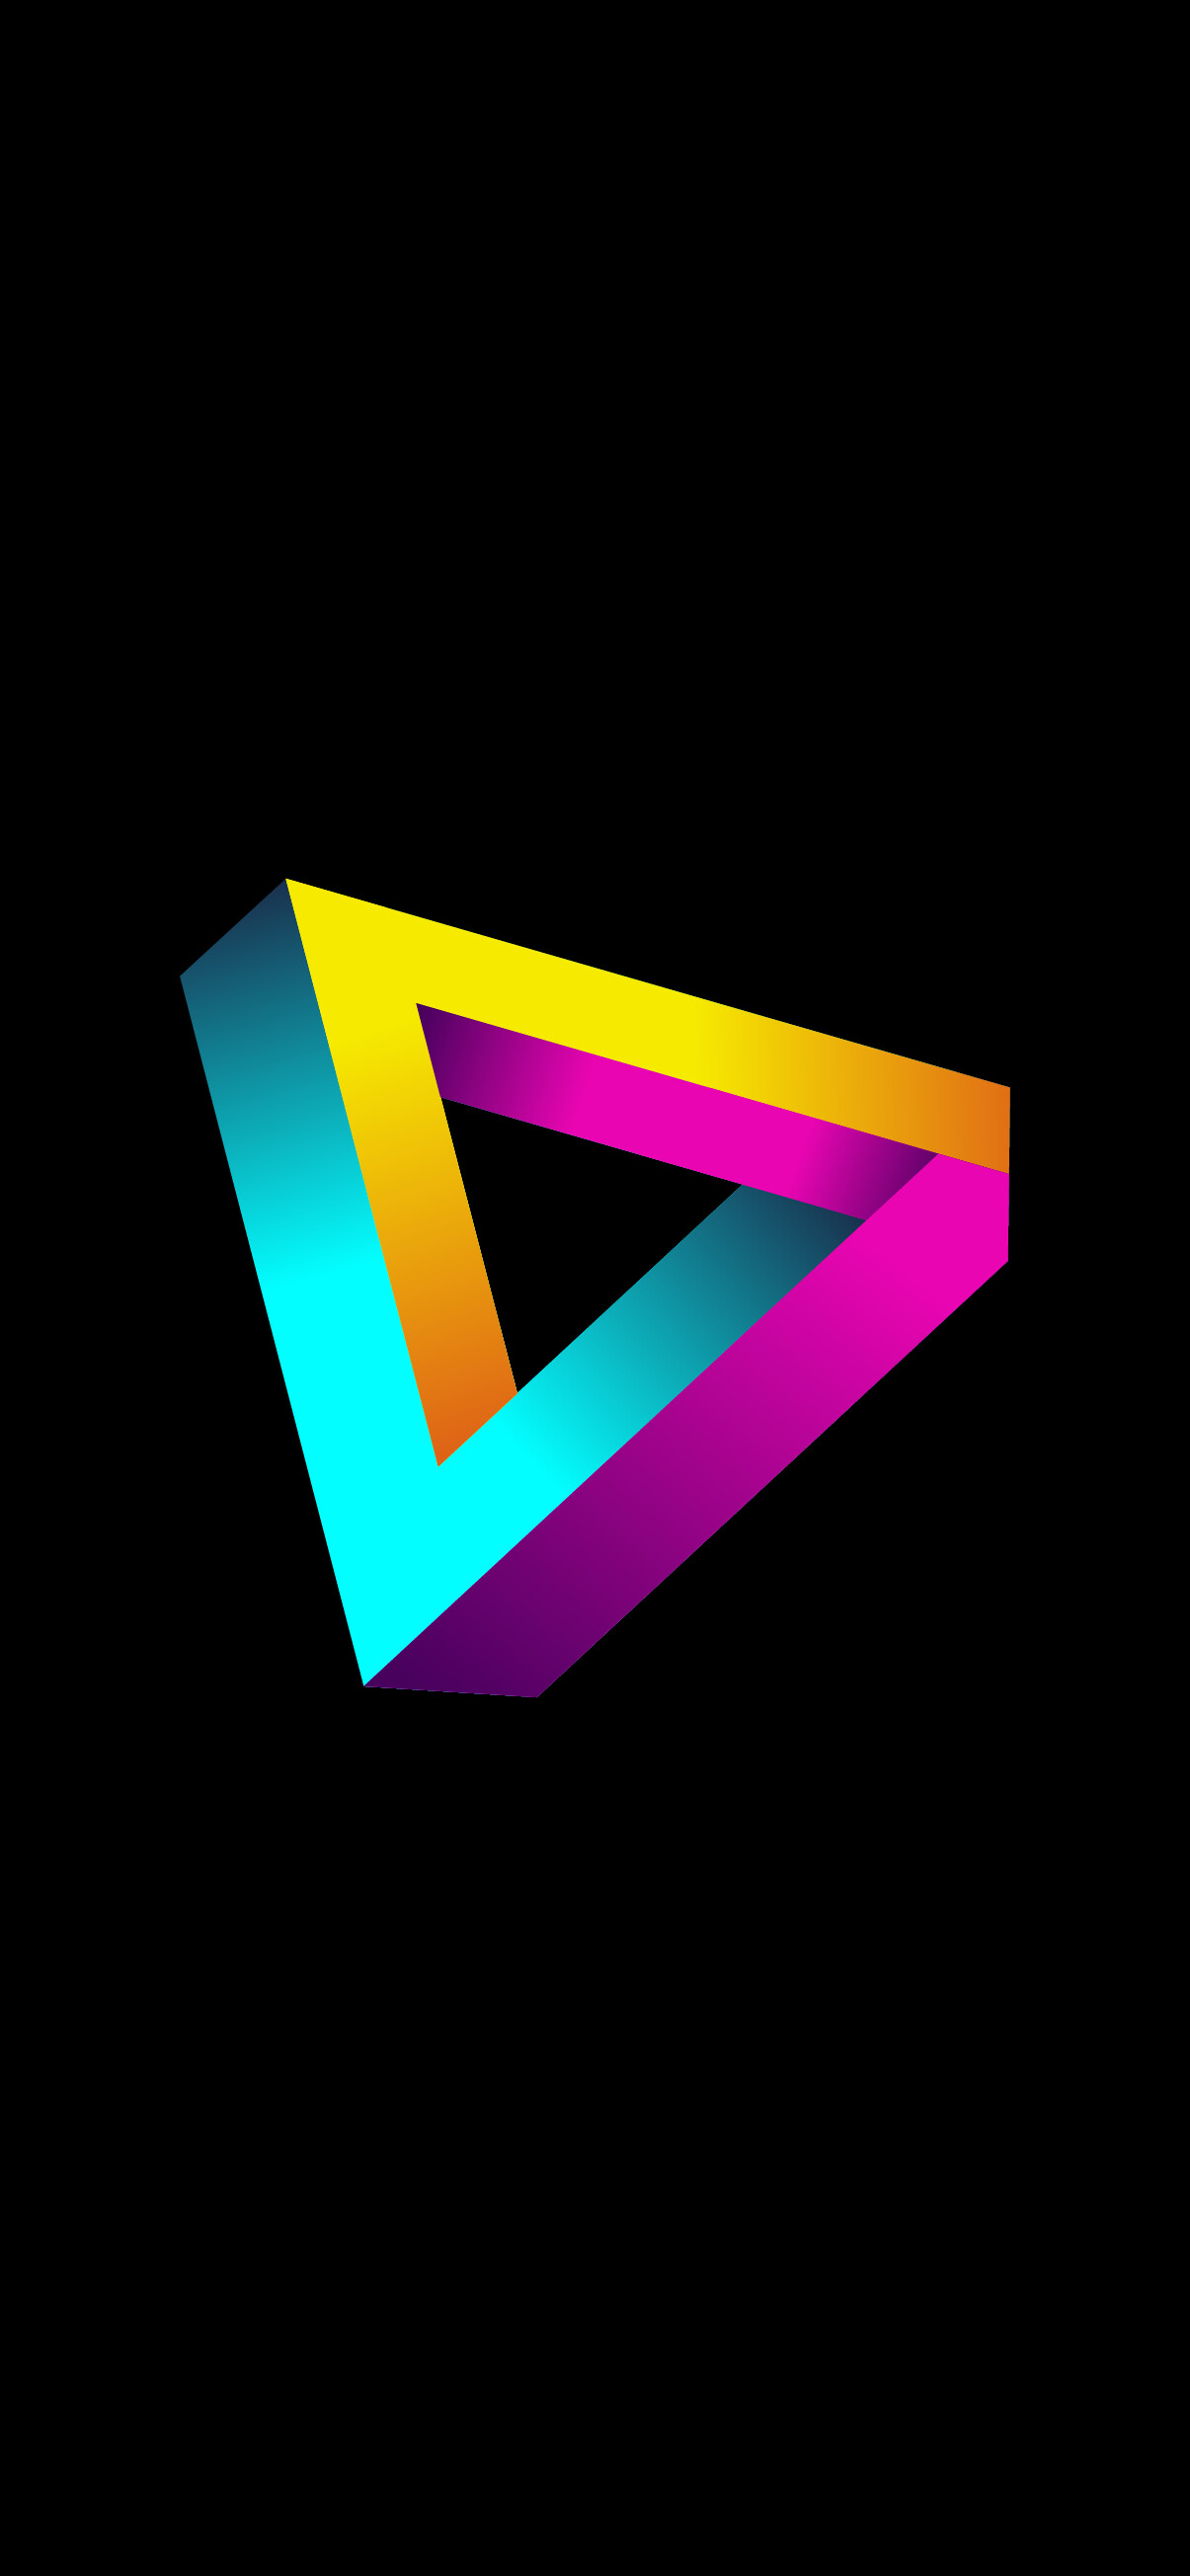 Triangle: Gradient, Penrose triangle, Colorful object. 1210x2610 HD Wallpaper.